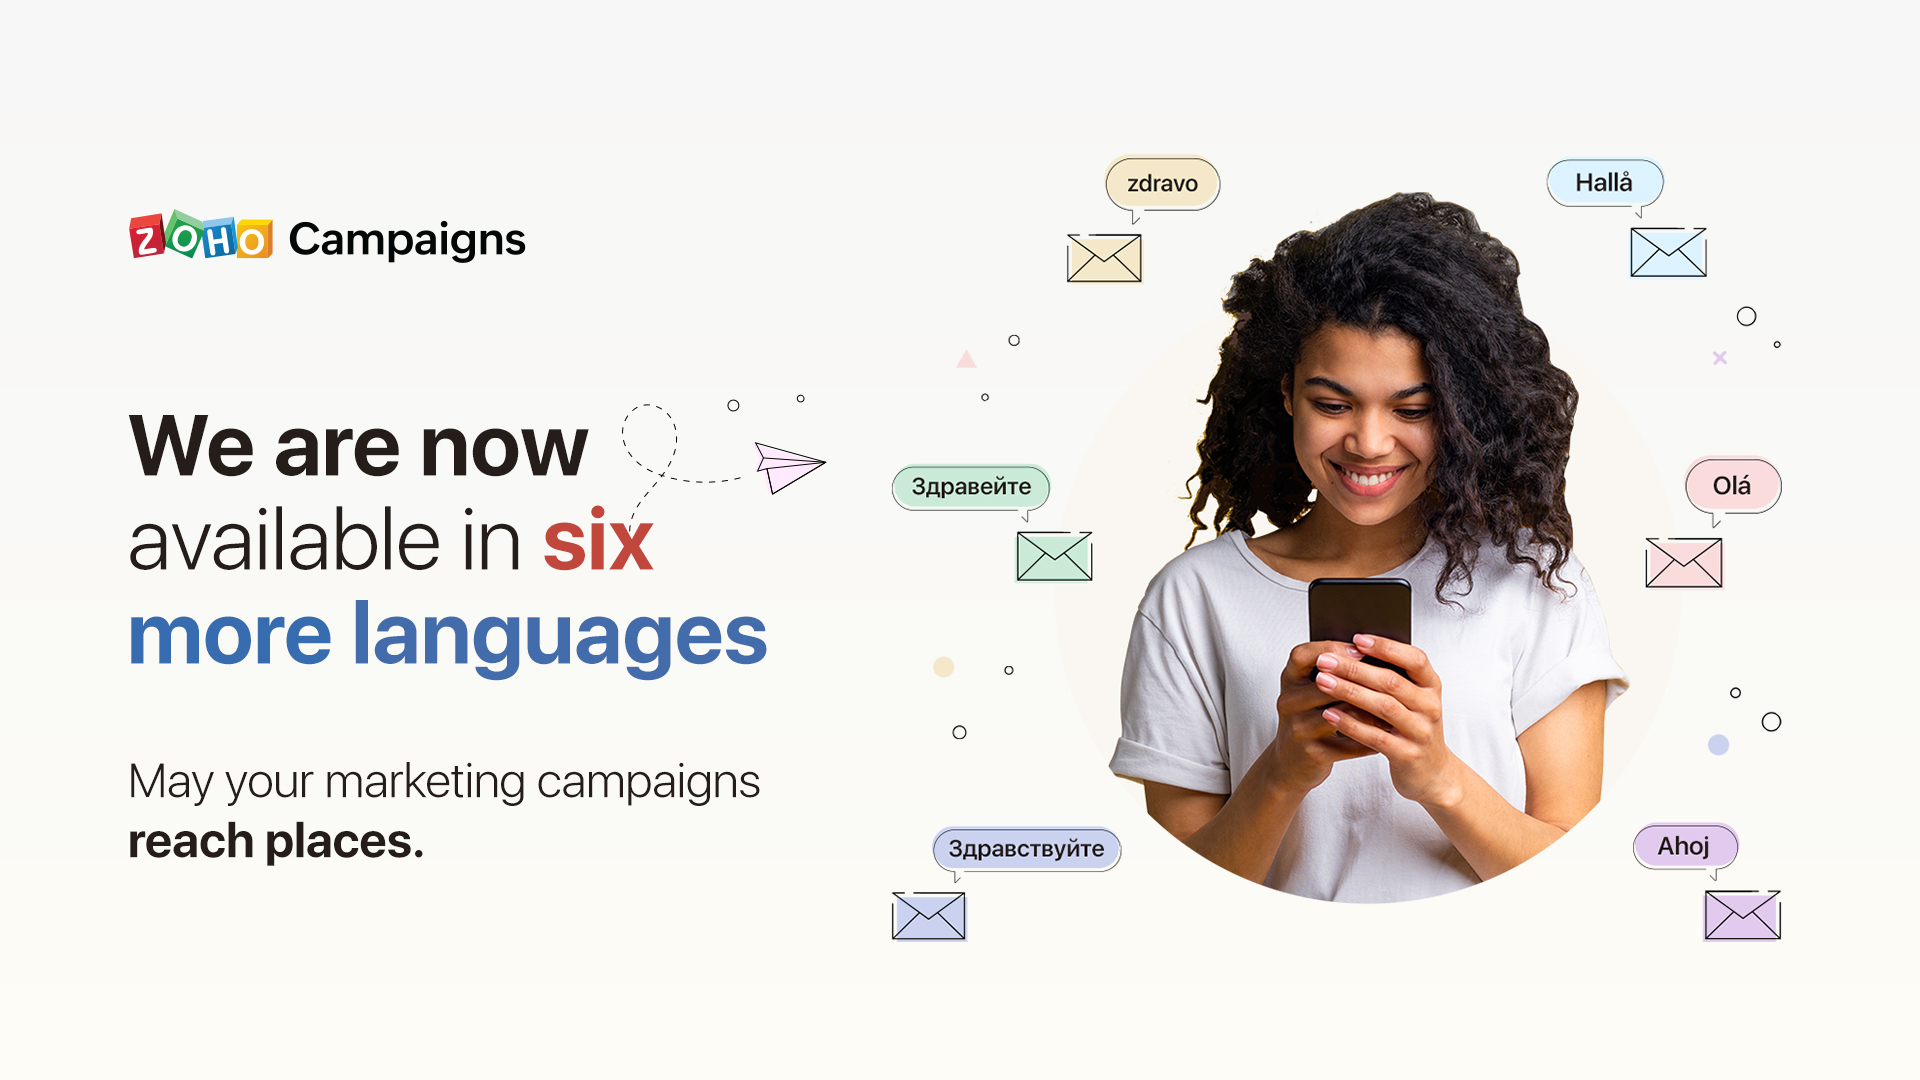 Zoho Campaigns introduces 6 more languages for email marketers